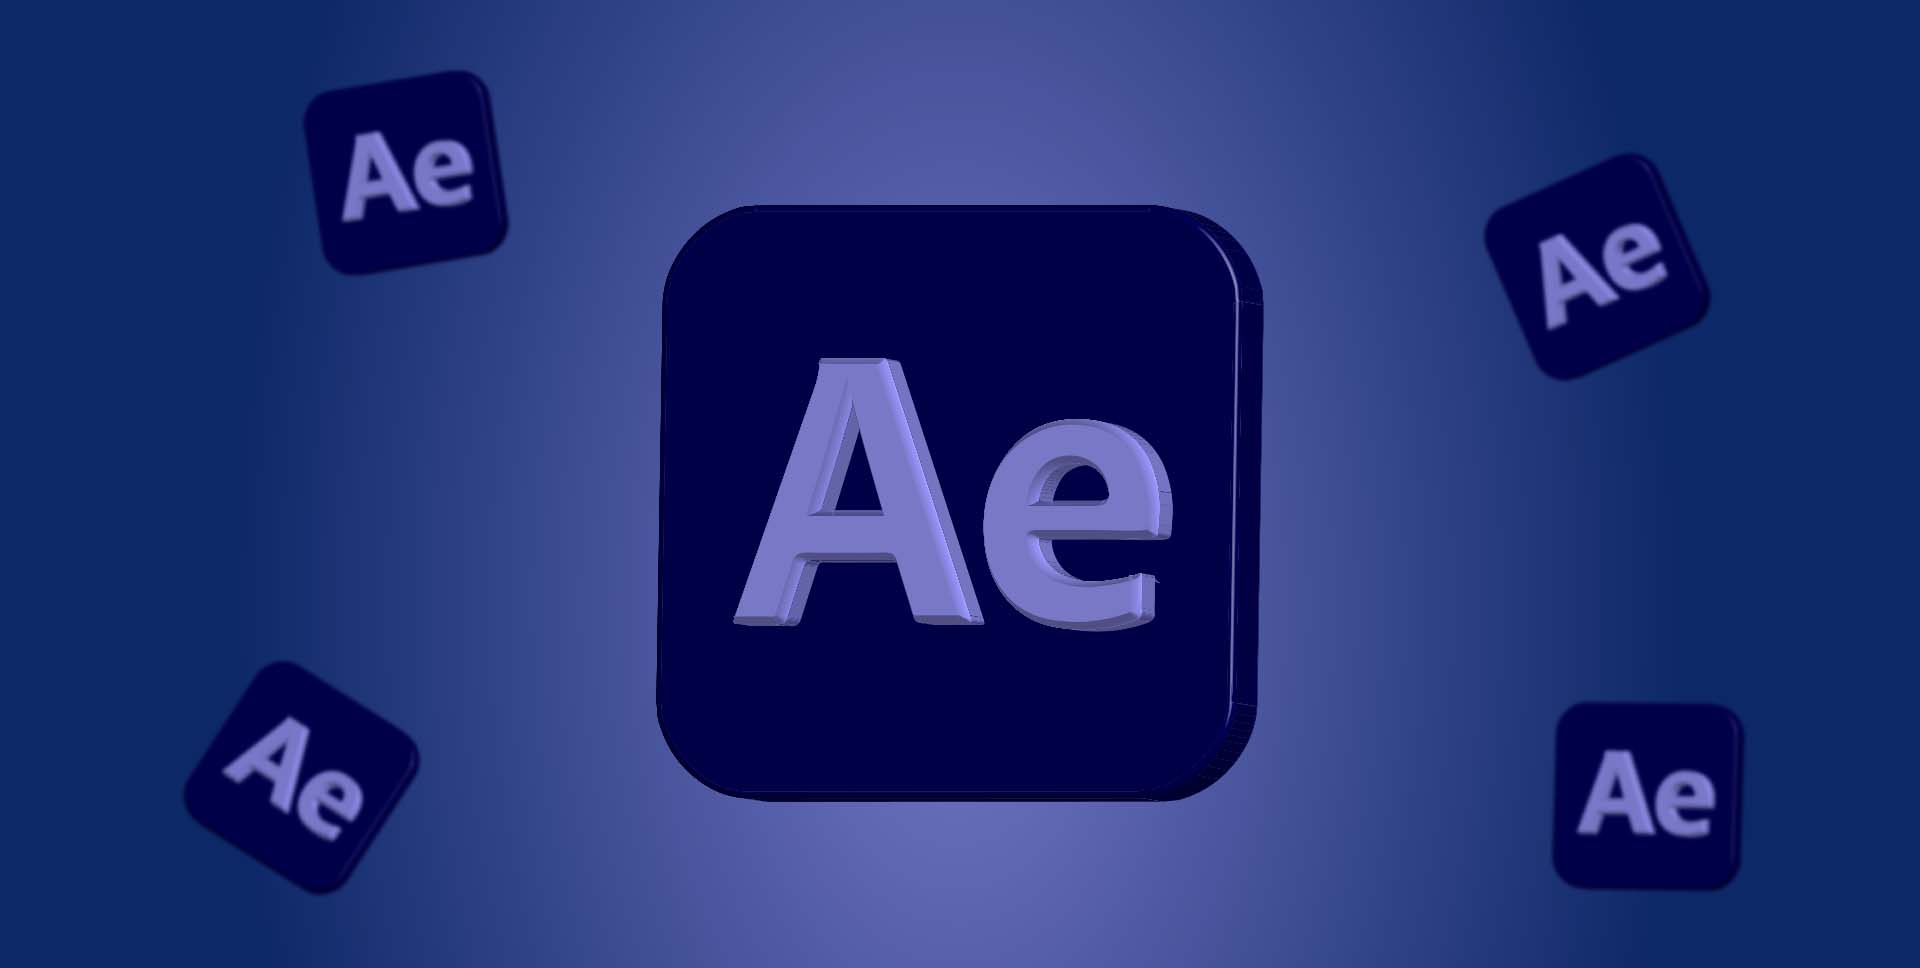 adobe after effects logos